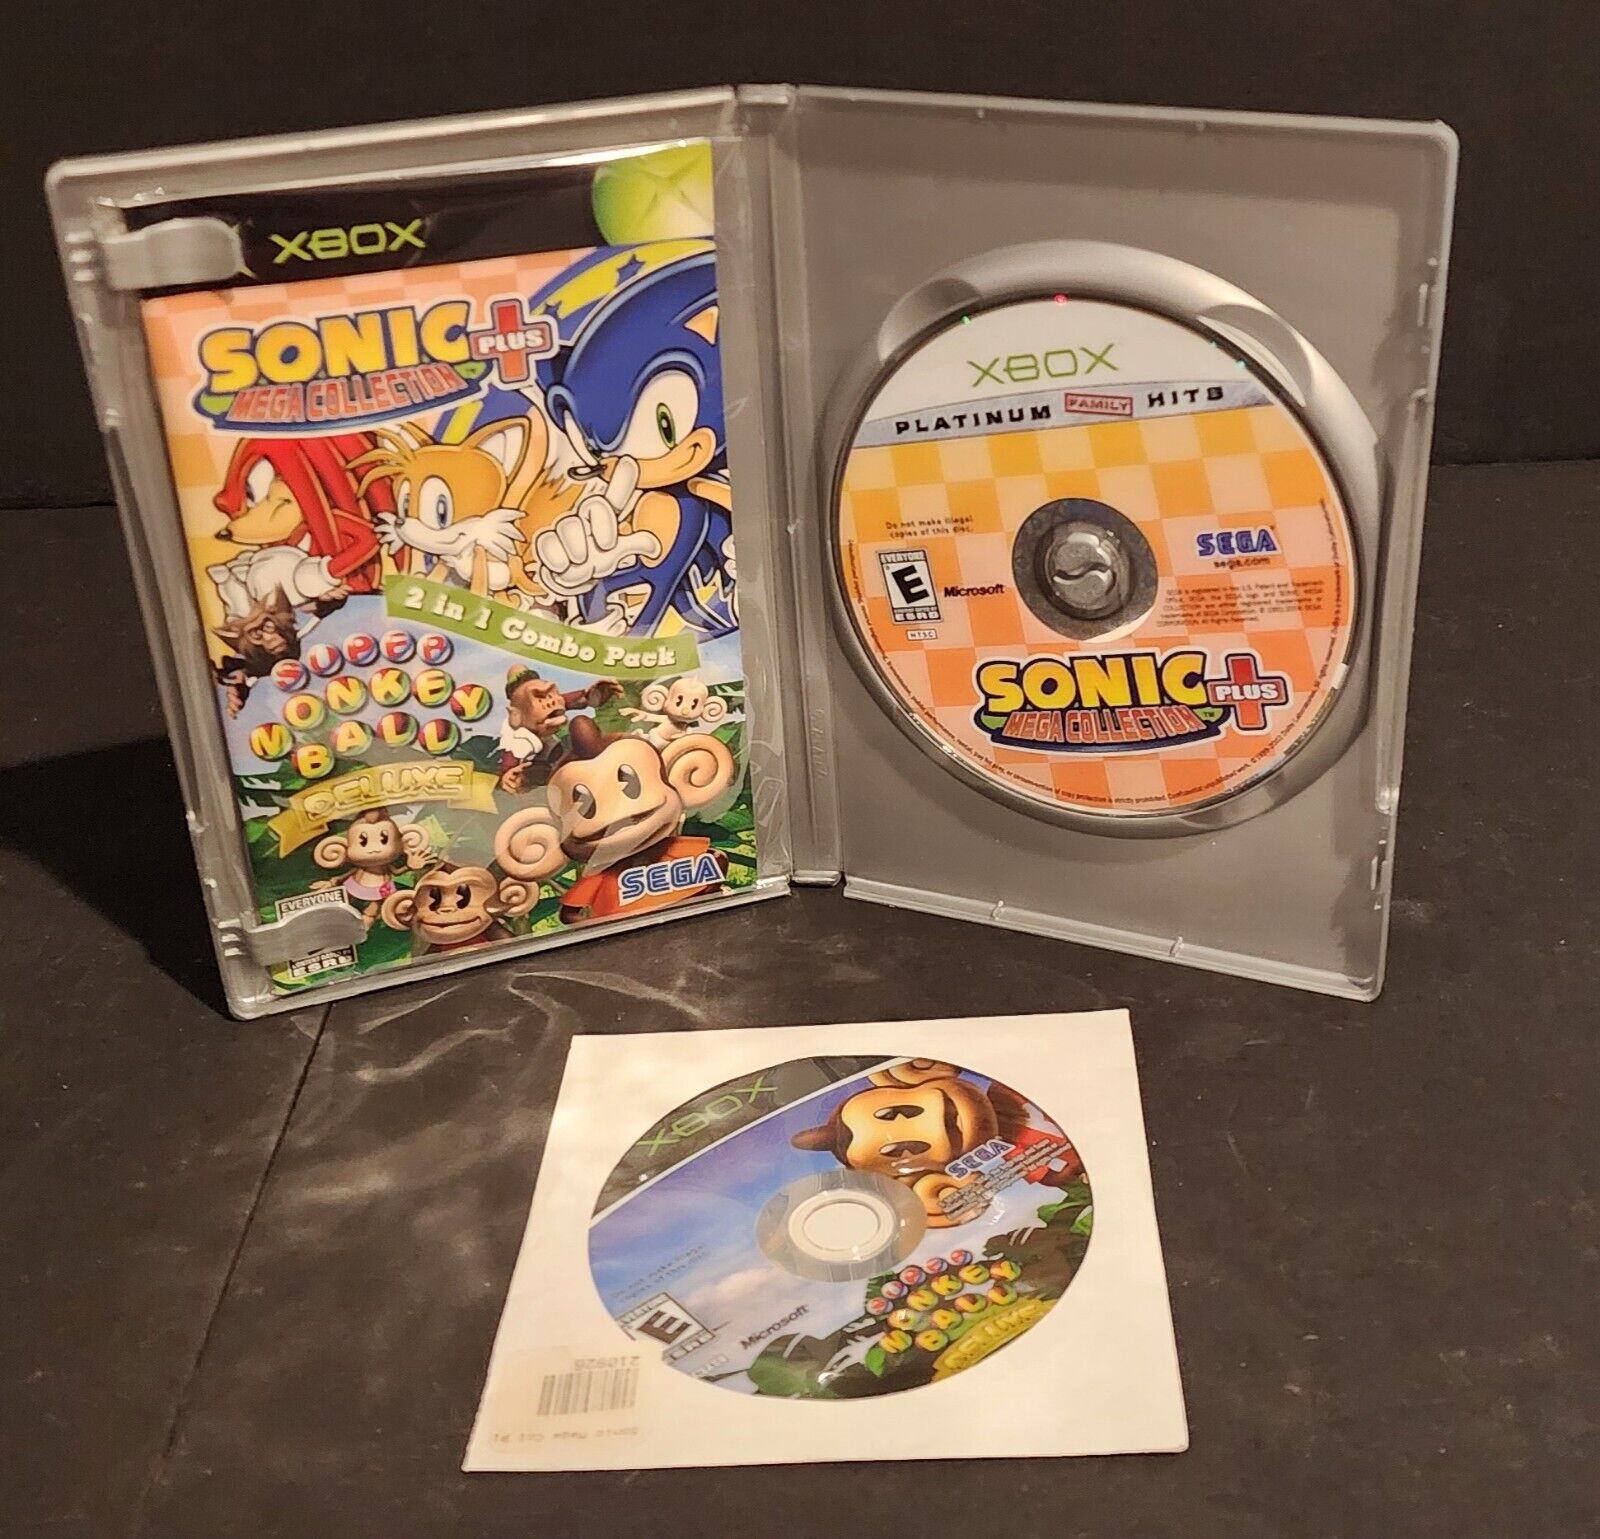 Sonic Mega Collection Plus/Super Monkey Ball Deluxe 2 in 1 Combo - Xbox Tested